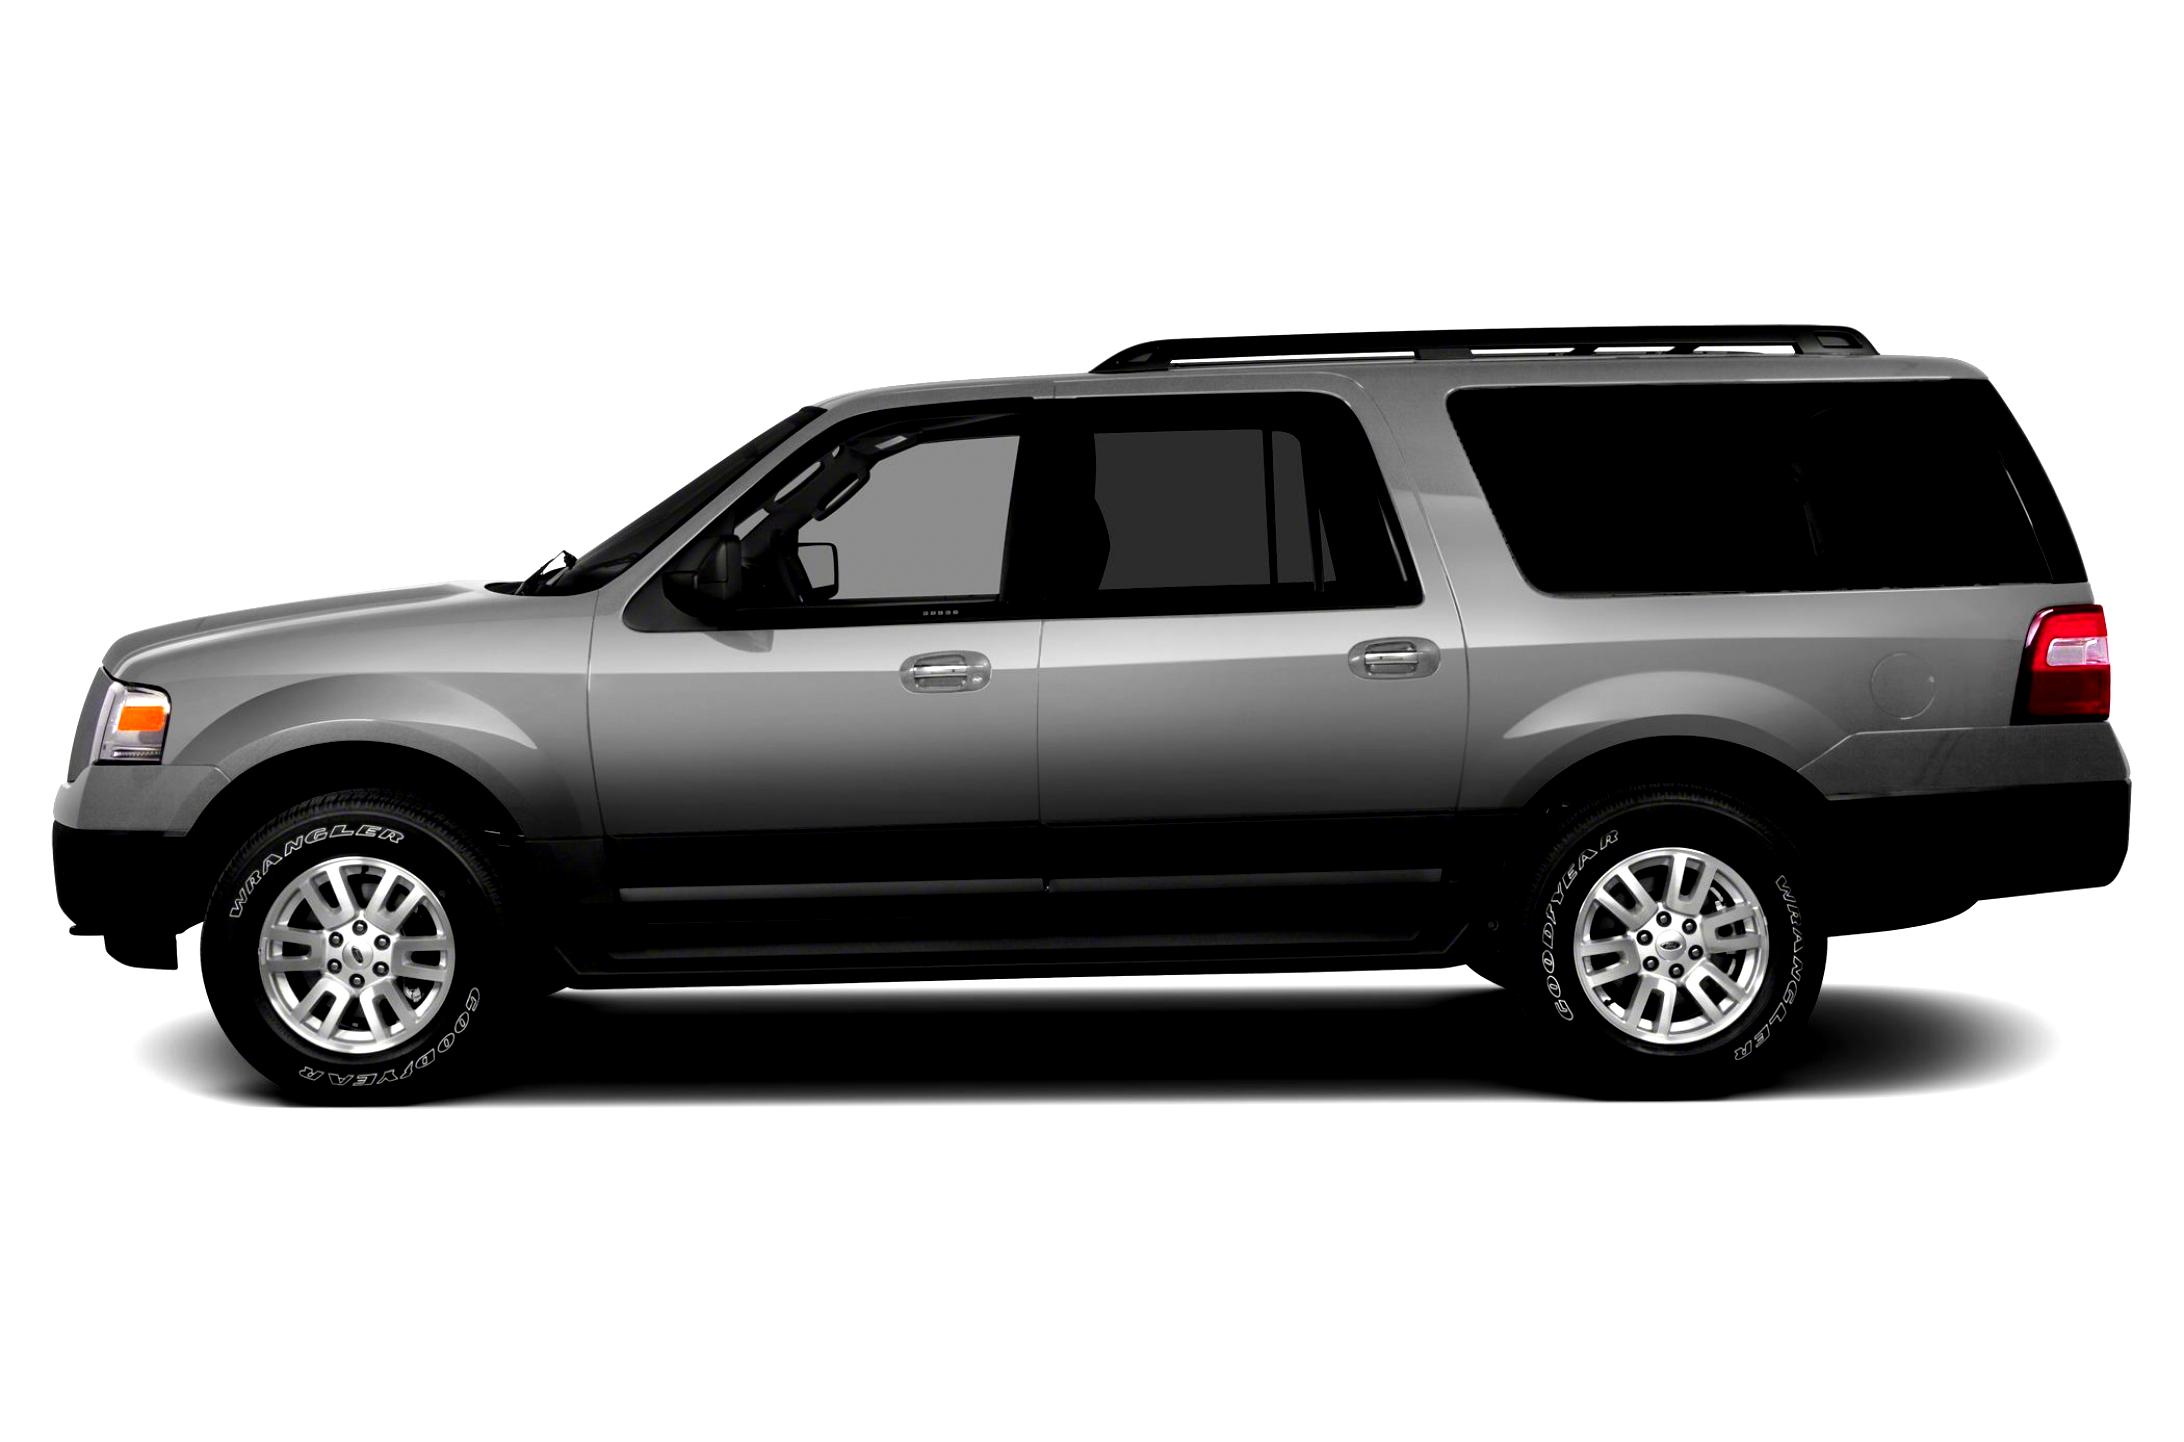 Ford Expedition 2014 #12